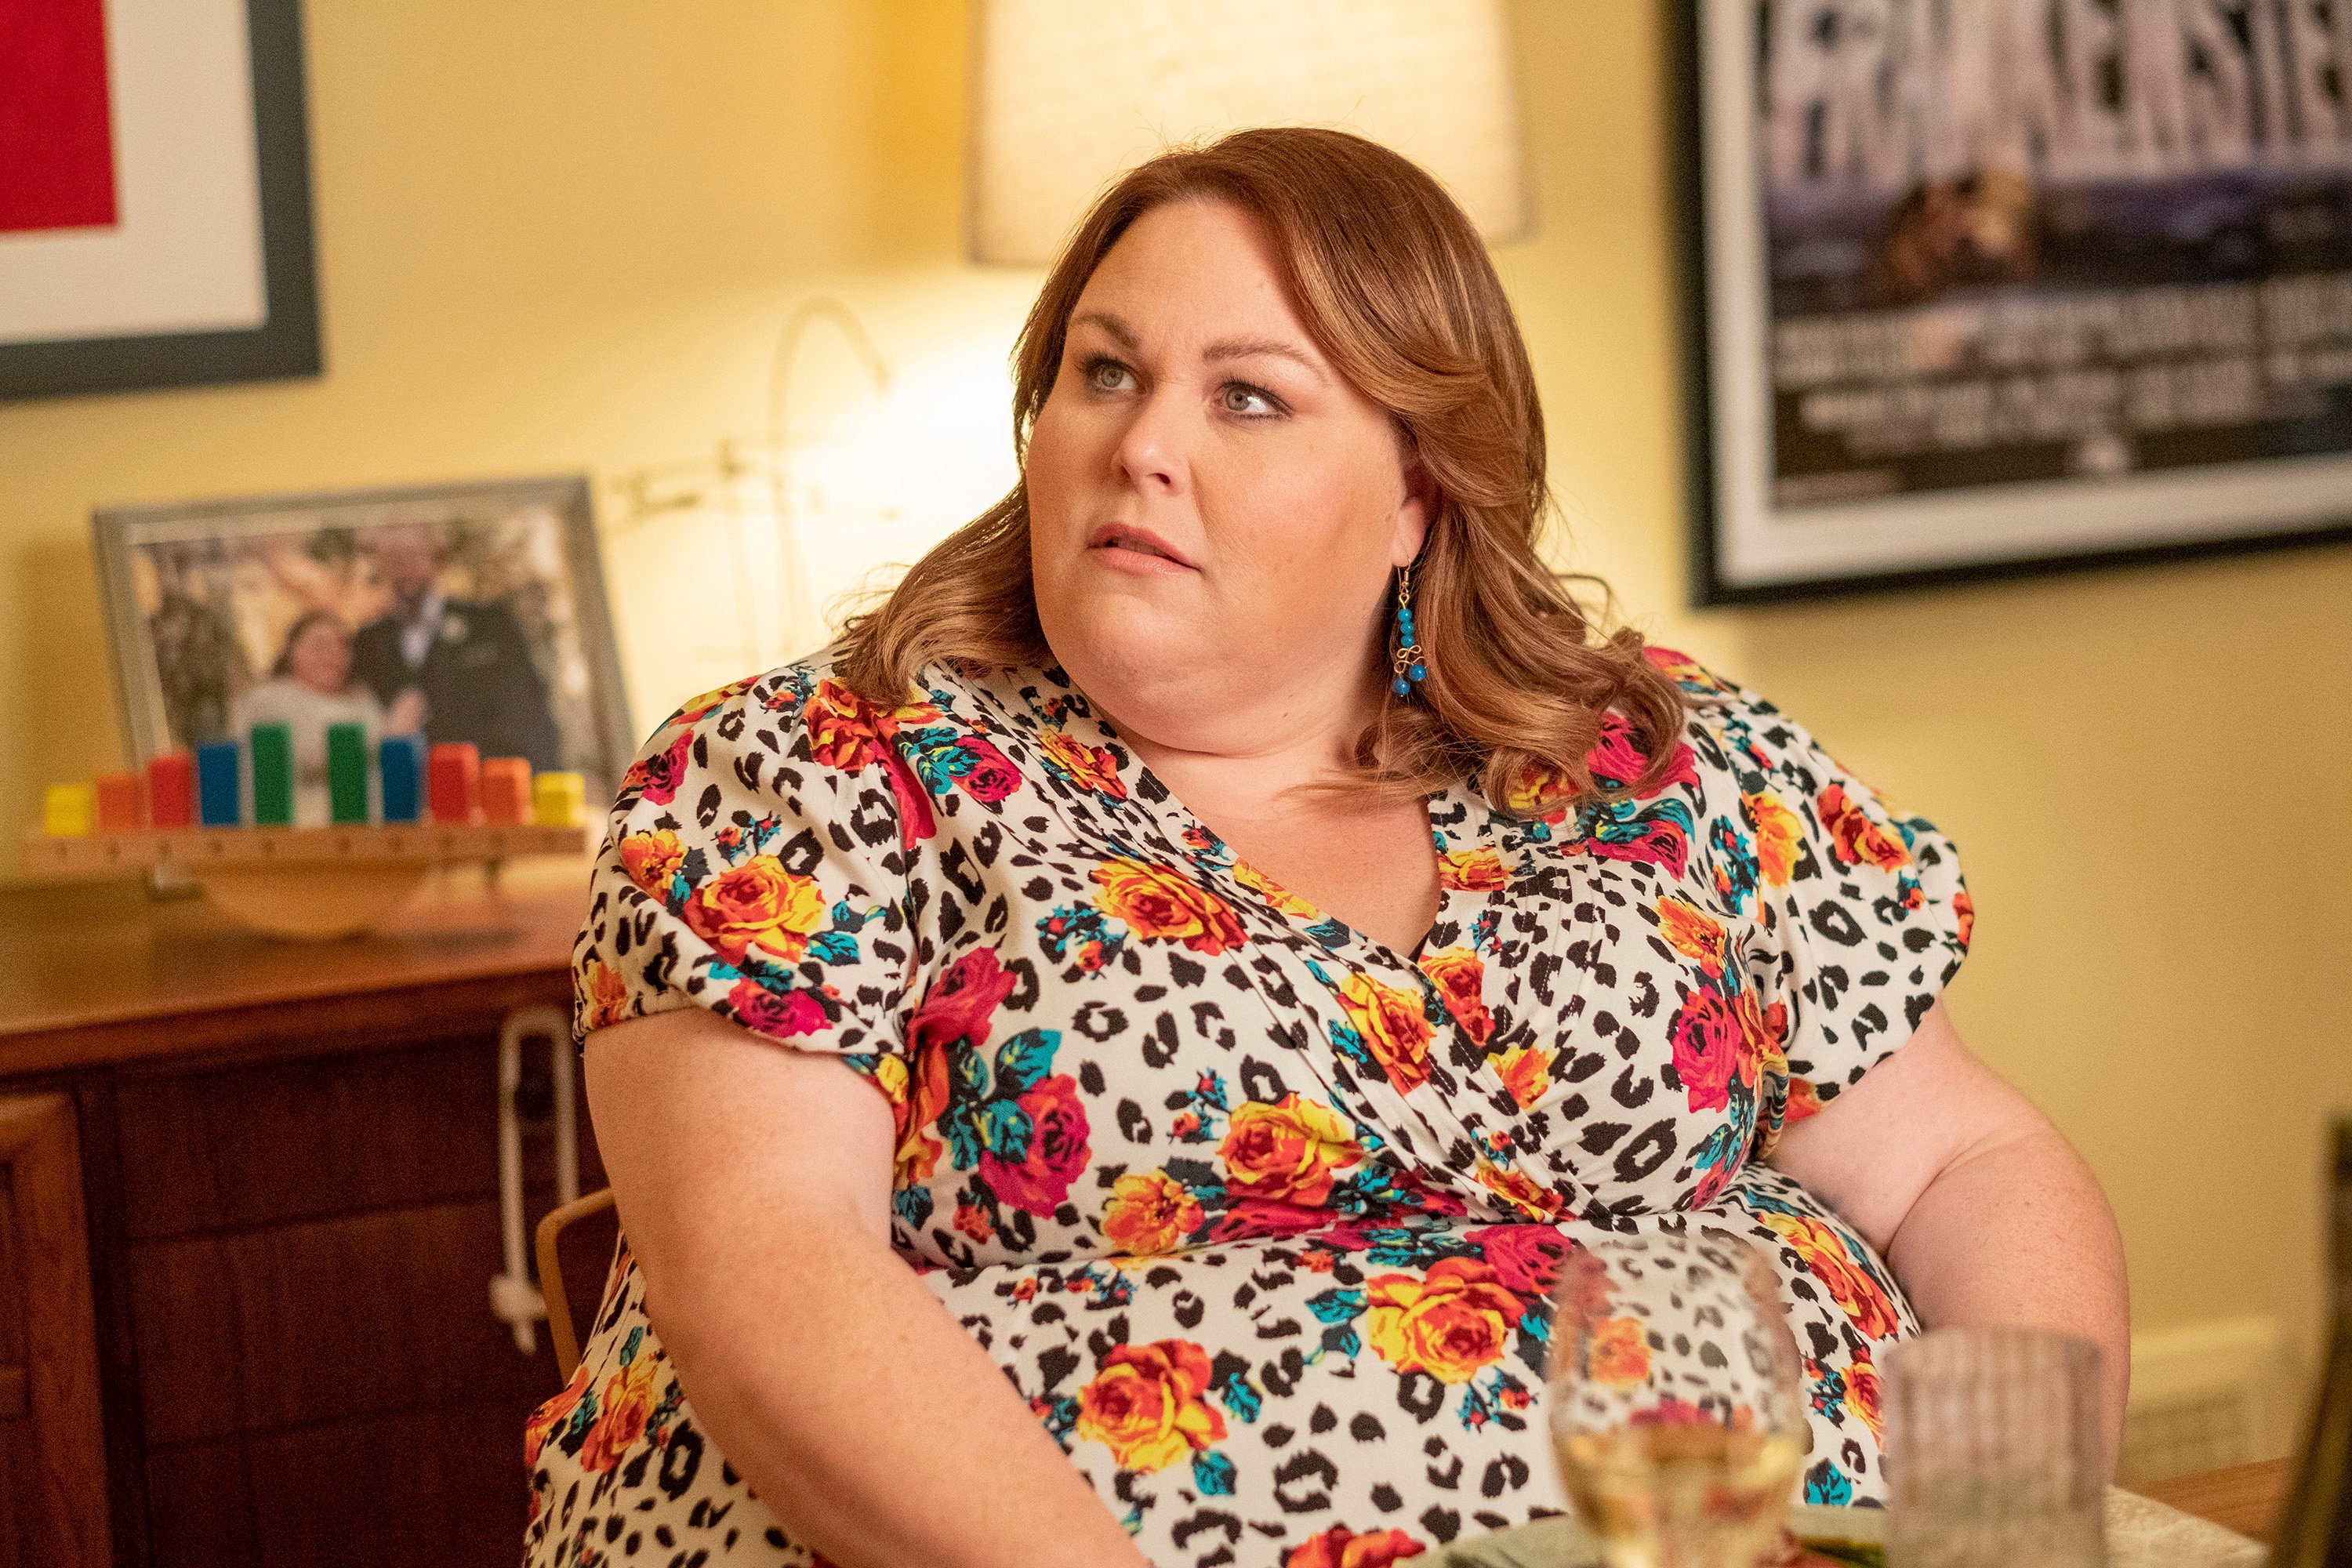 Chrissy Metz, in character as Kate in 'This Is Us' Season 6, wears a white dress with black leopard print and red and orange roses on it.